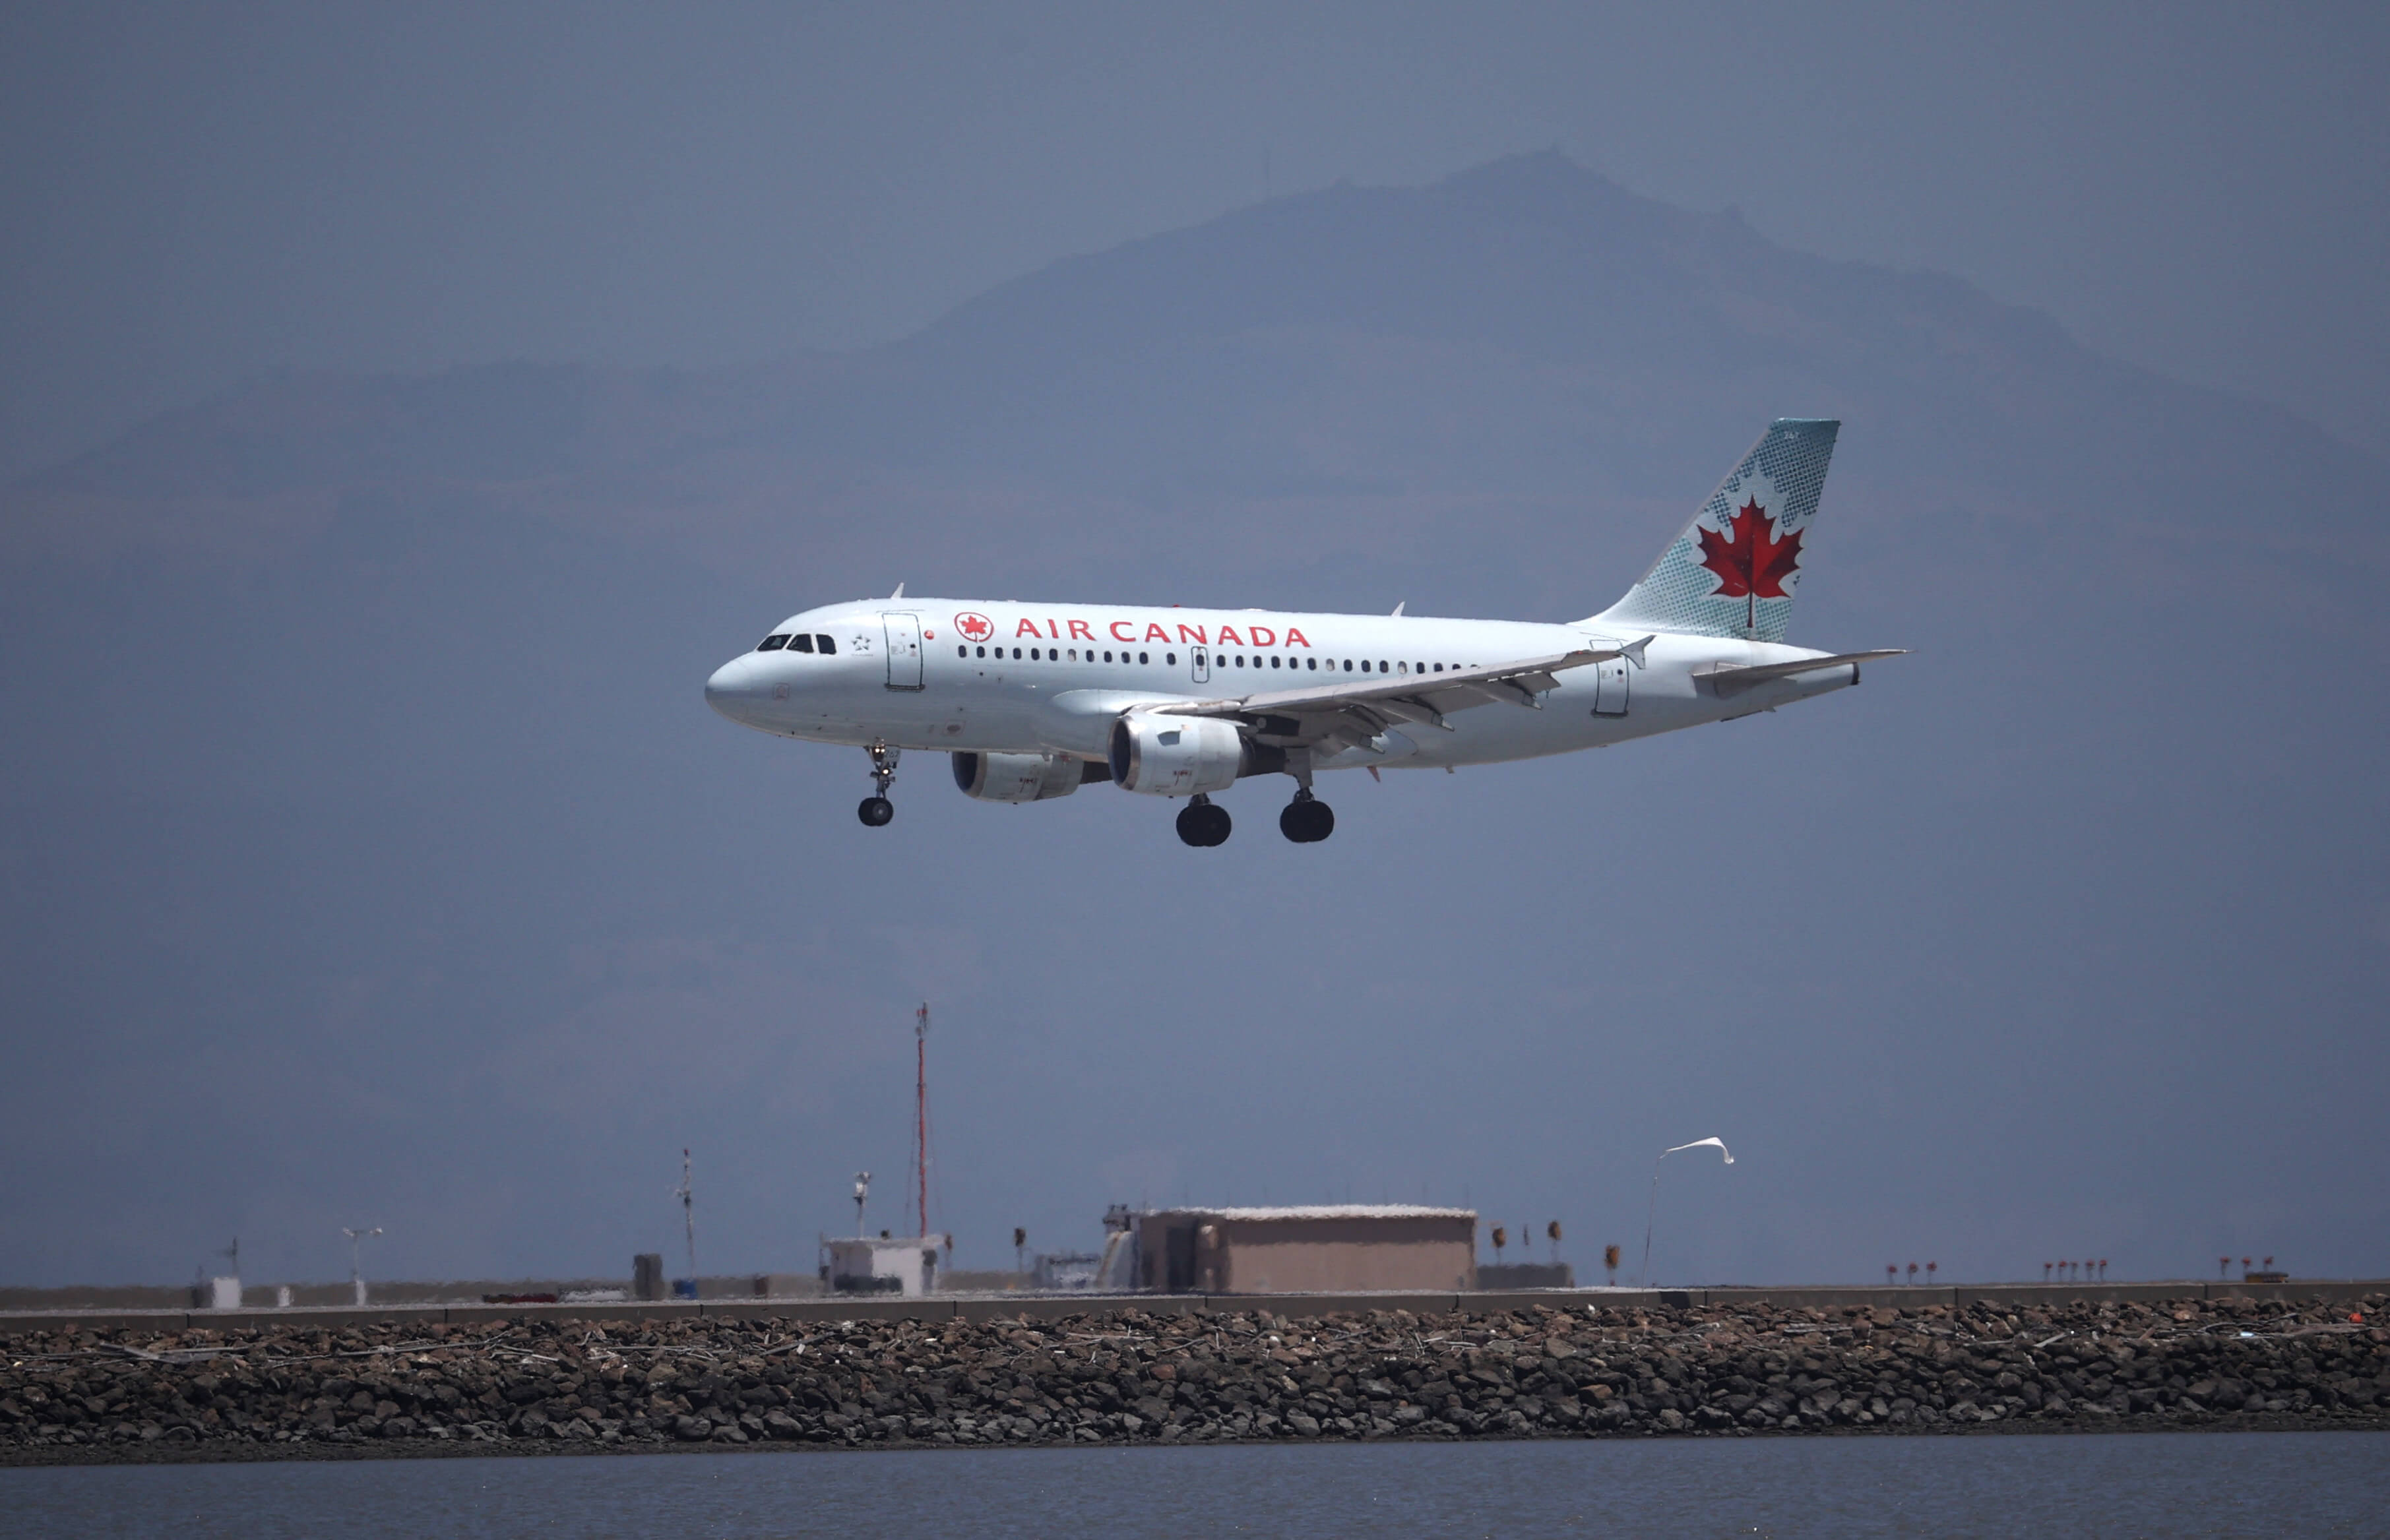 No direct passenger flights from India to Canada for another month